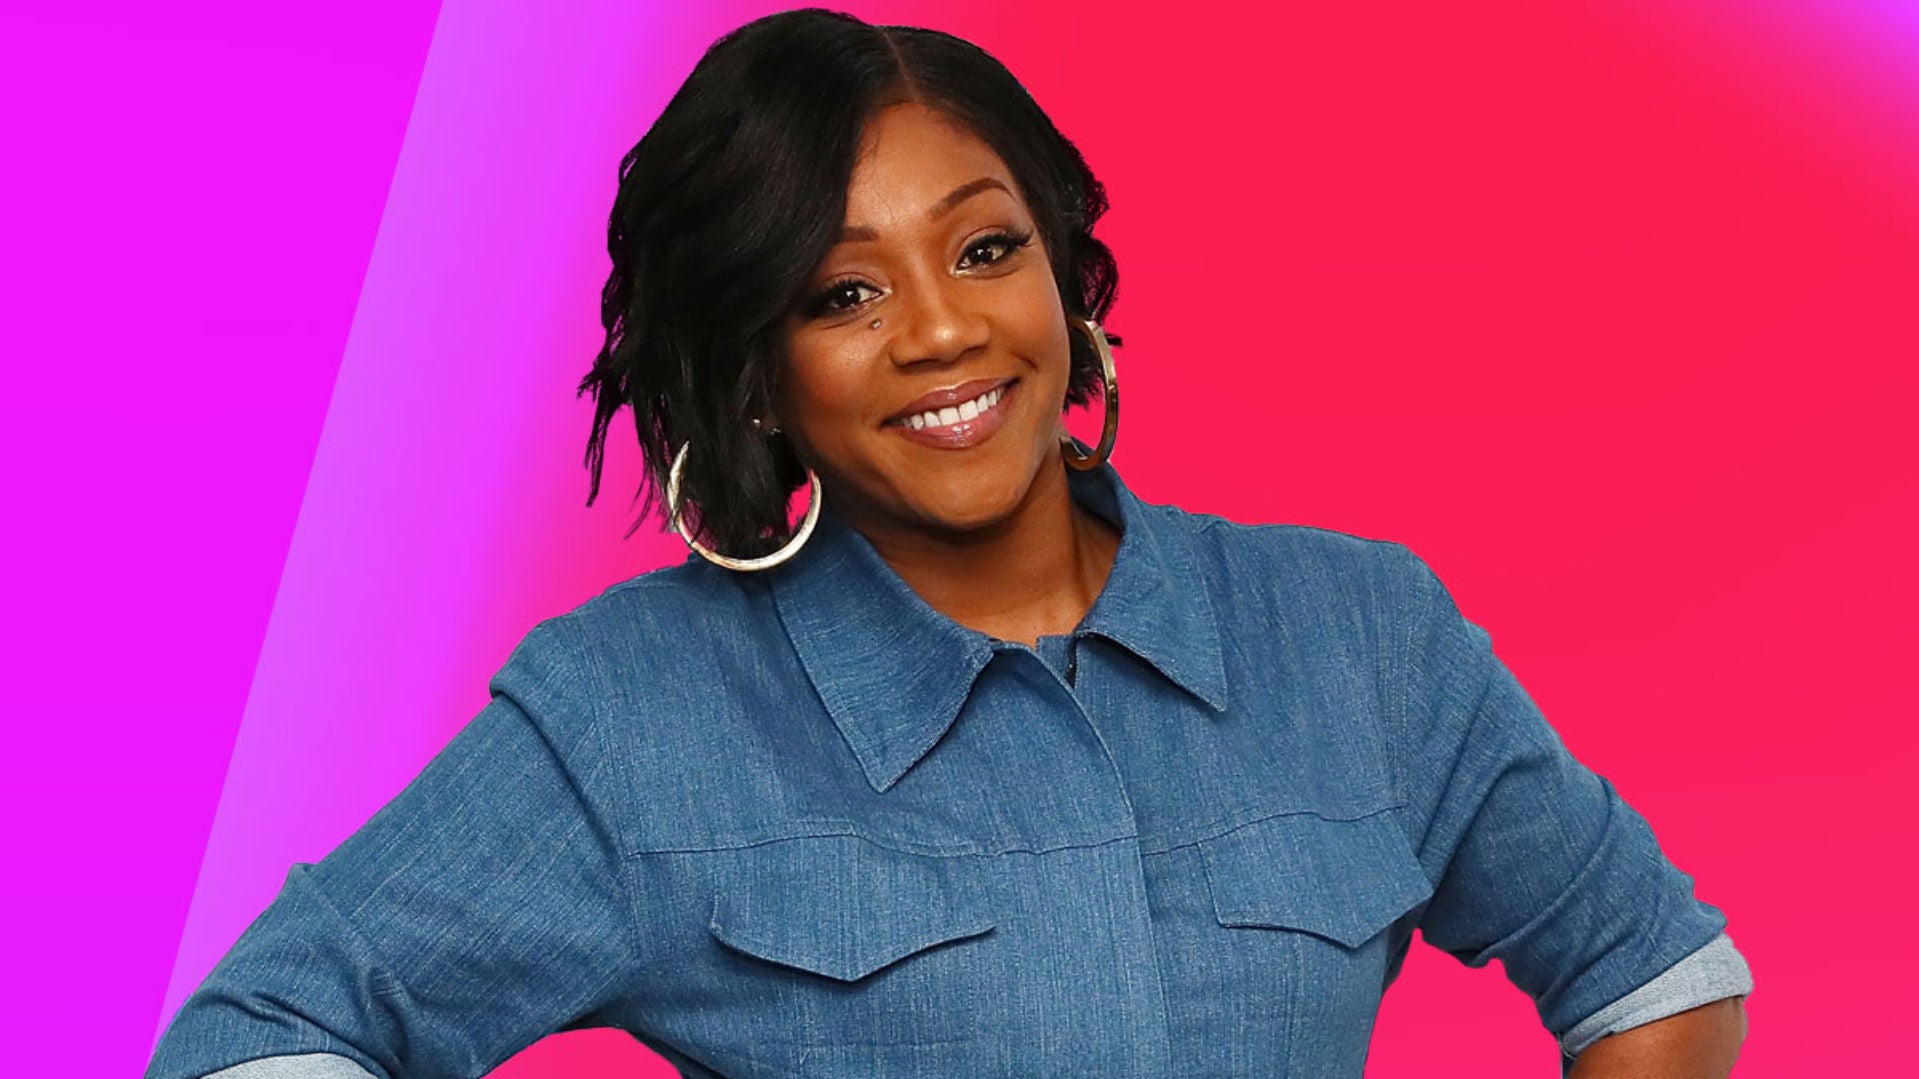 Tiffany Haddish Is Launching A New Comedy Series With Netflix